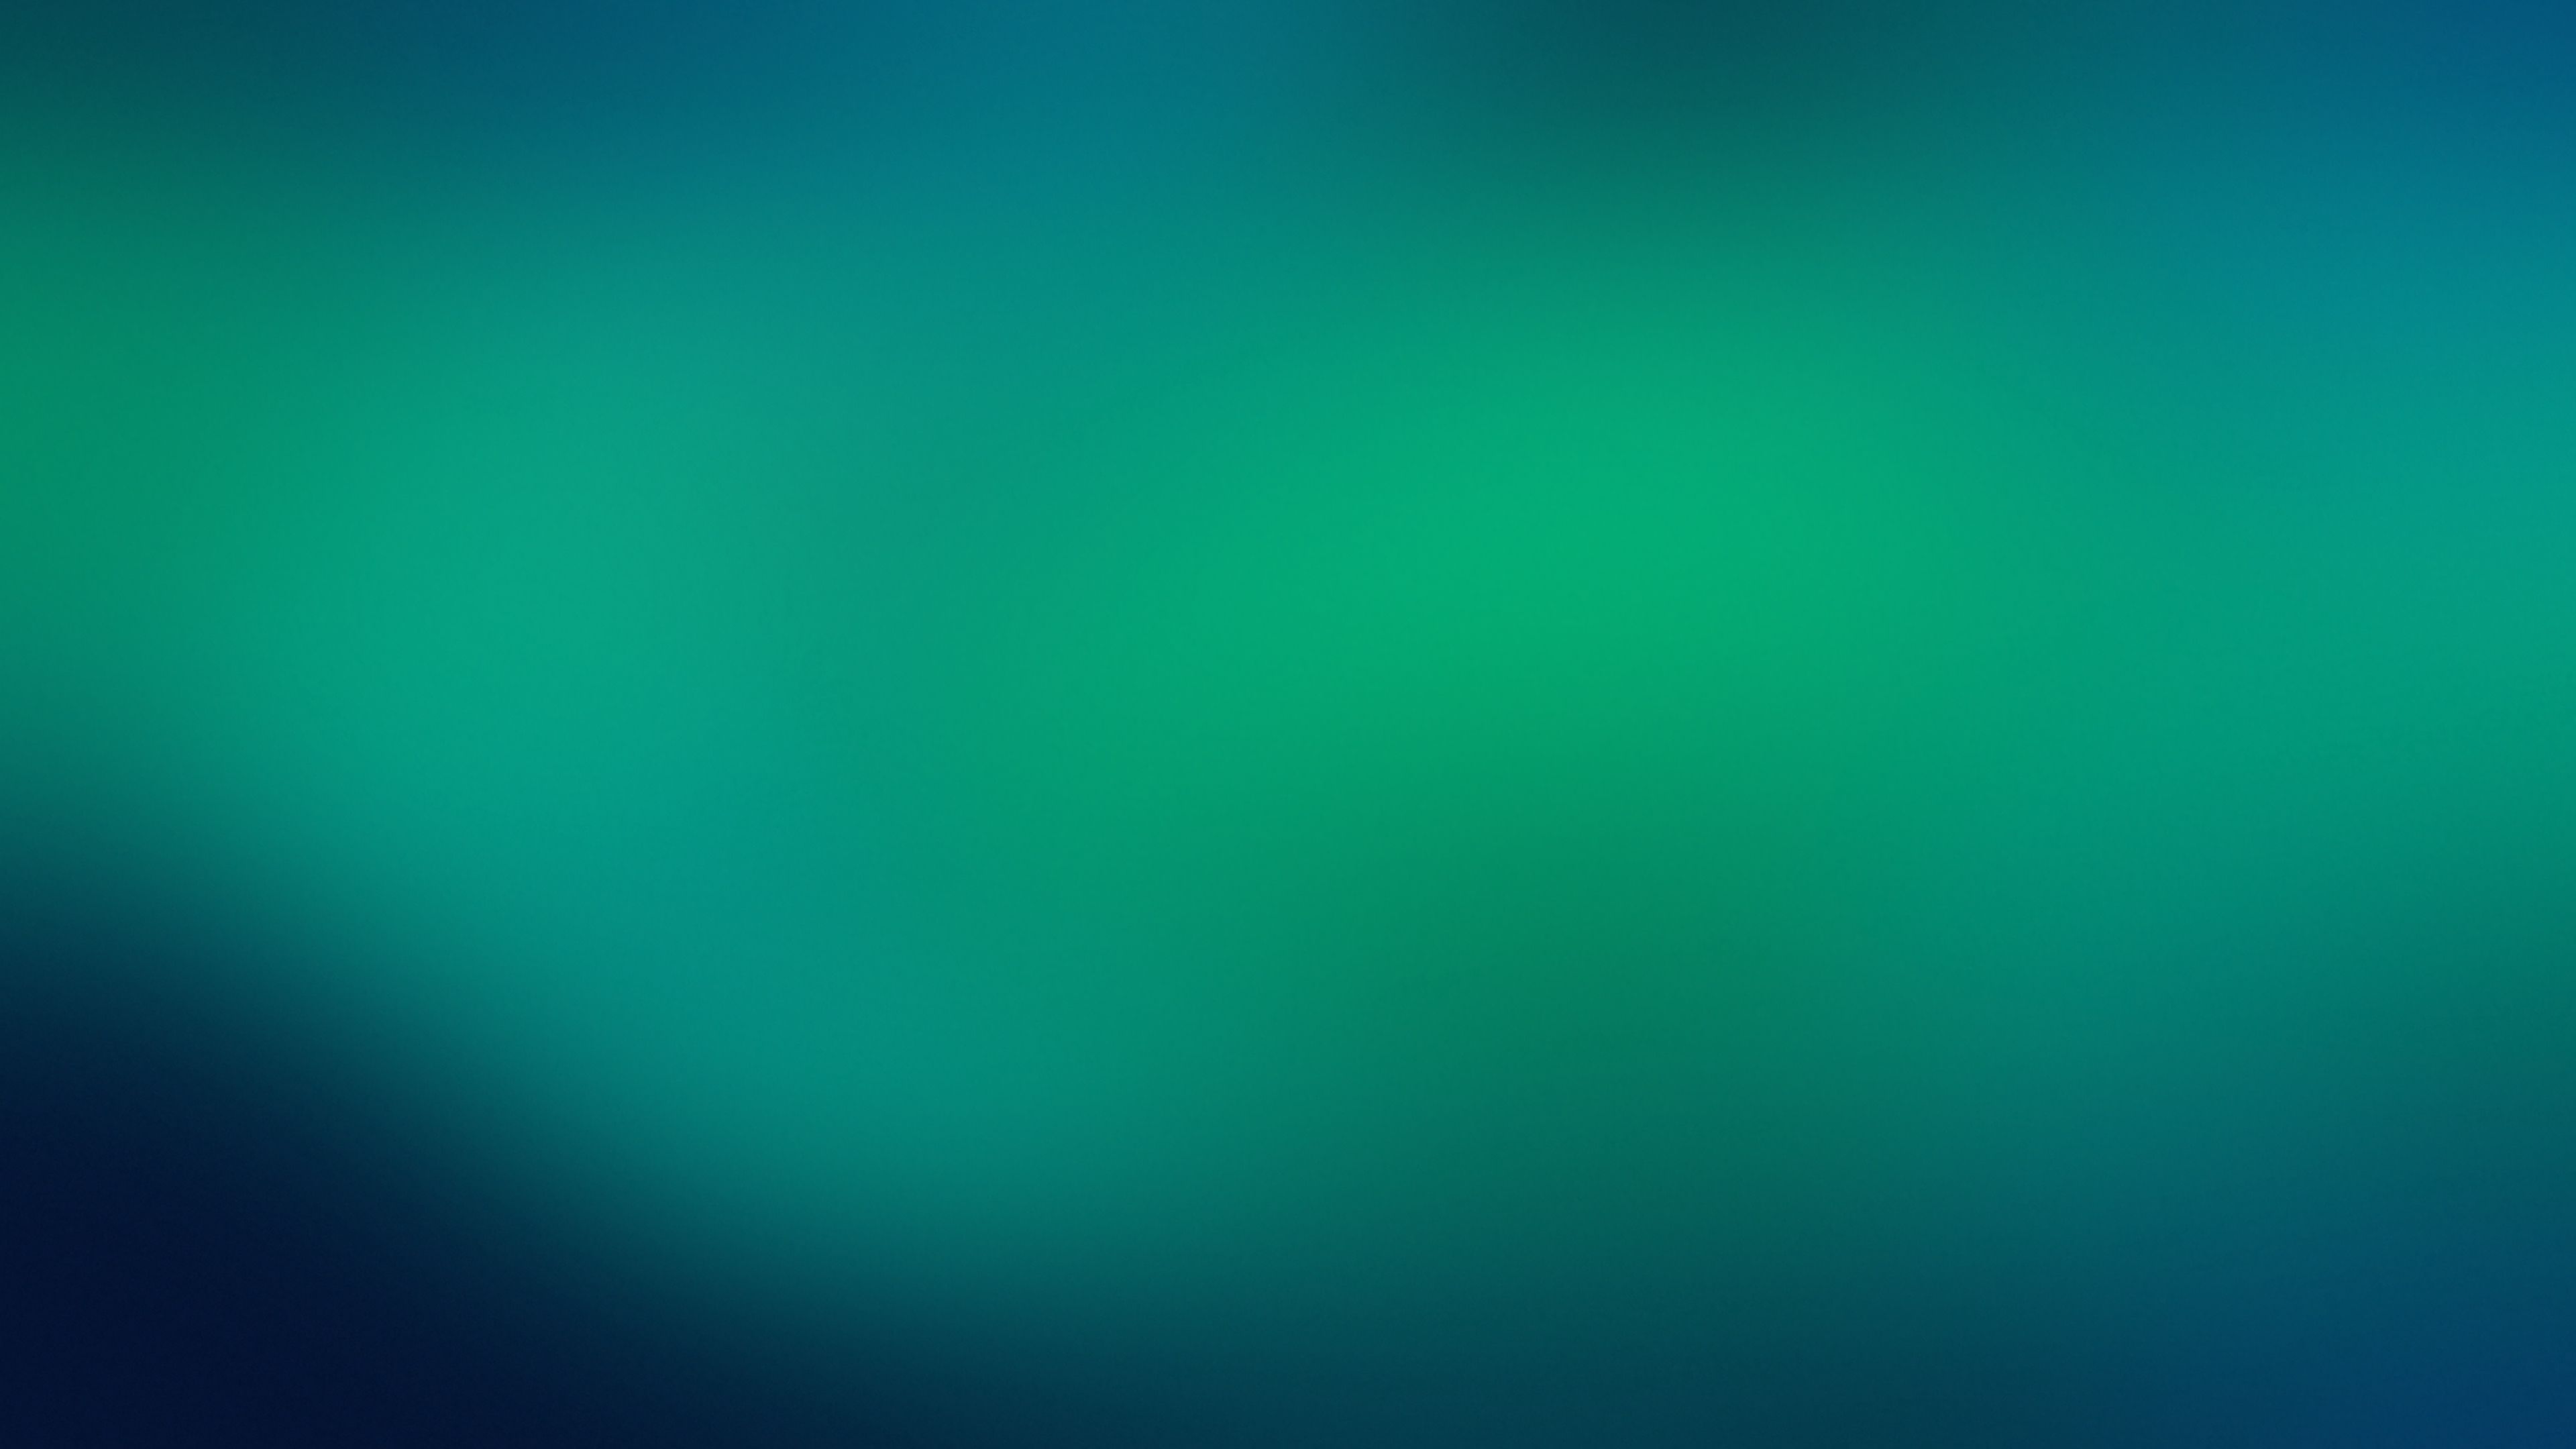 green, gradient, texture, textures, background wallpaper for mobile